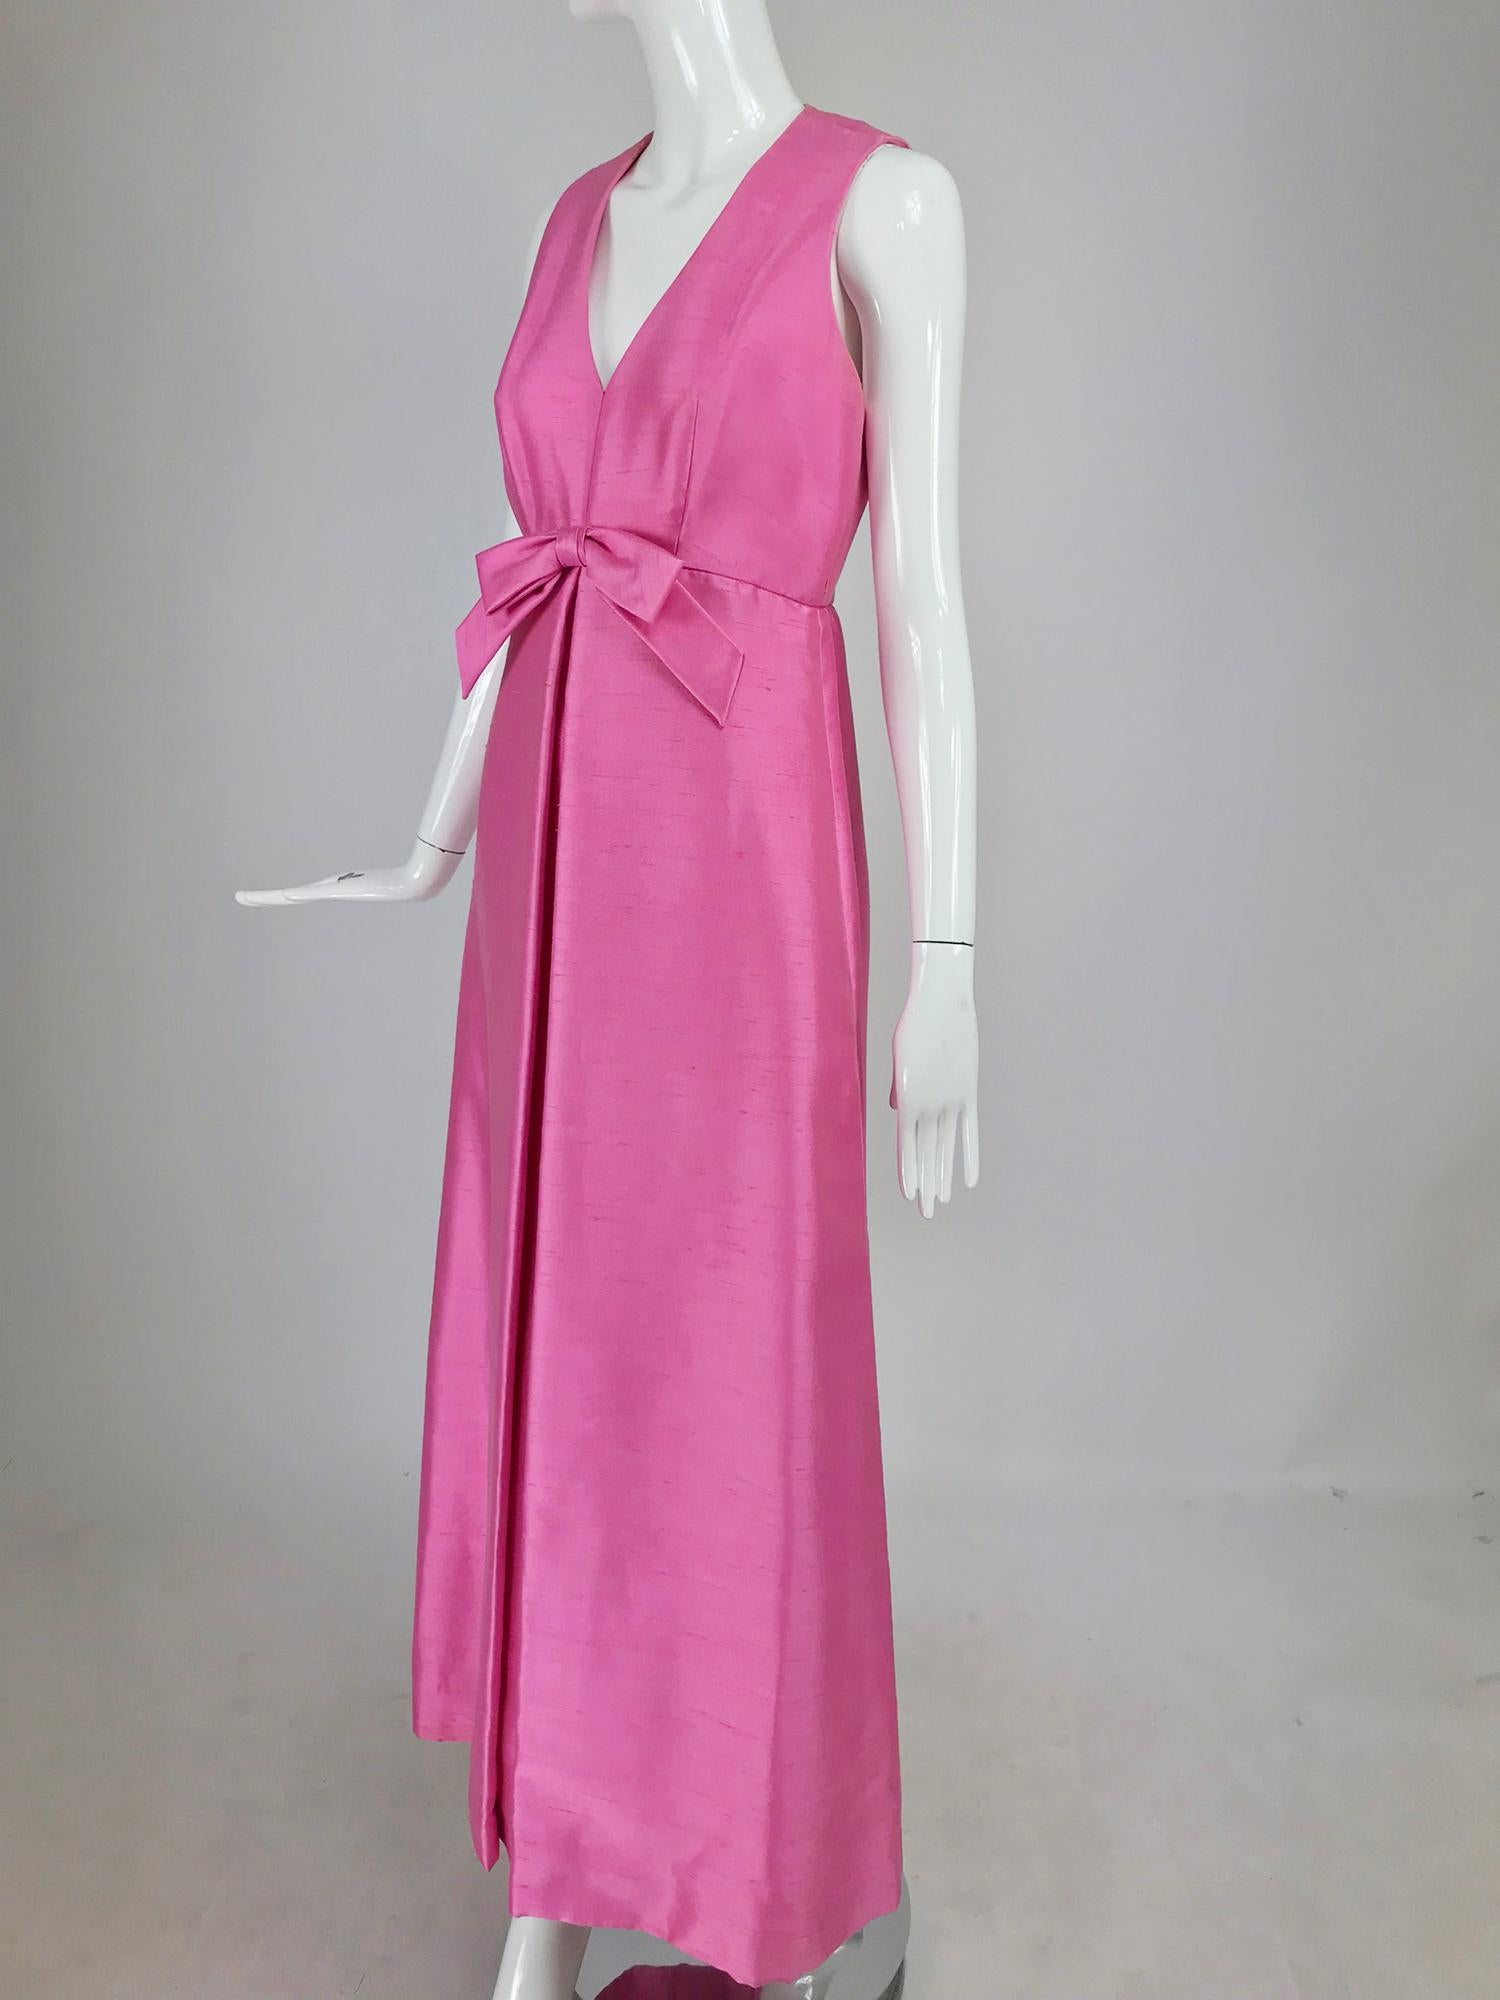 Kent Originals bubble gum pink slub silk bow front evening dress from the 1960s. This beautiful gown is a classic. Sleeveless gown with V neckline and darted bodice. The seamed waist has a self bow at the center, the long A line skirt has an